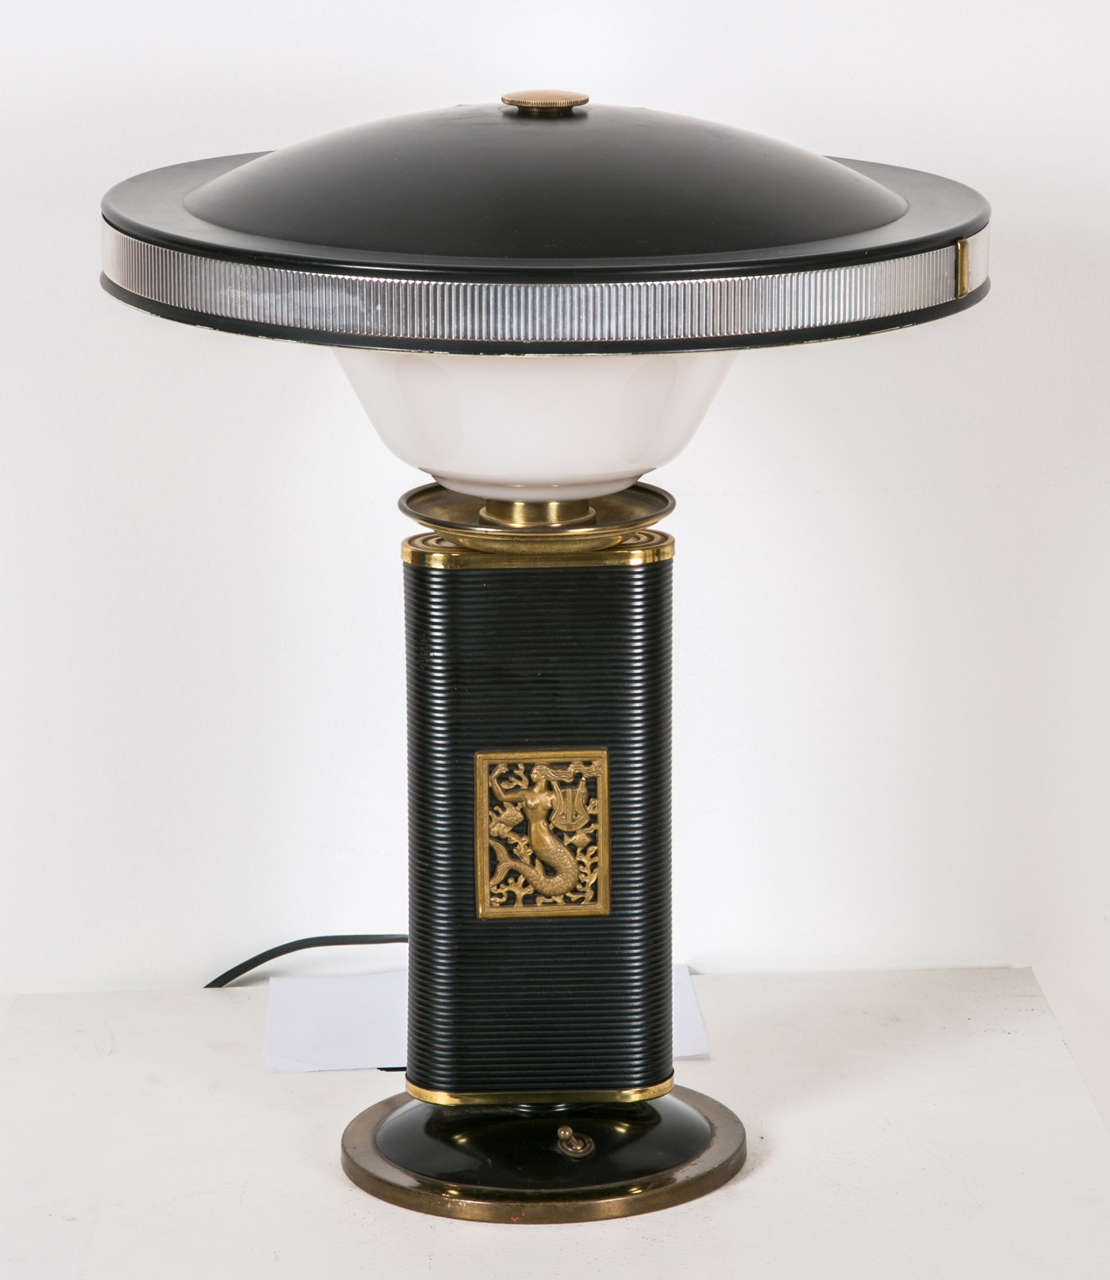 Exceptionally French table lamp 'Sirene-Eileen Gray' edited by Jumo.
The mermaid on the shaft of the lamp can be recognized and is directly inspired by the 'Mermaid Chair' emblematic of Eileen Gray's work. 
Electrical wiring to the European